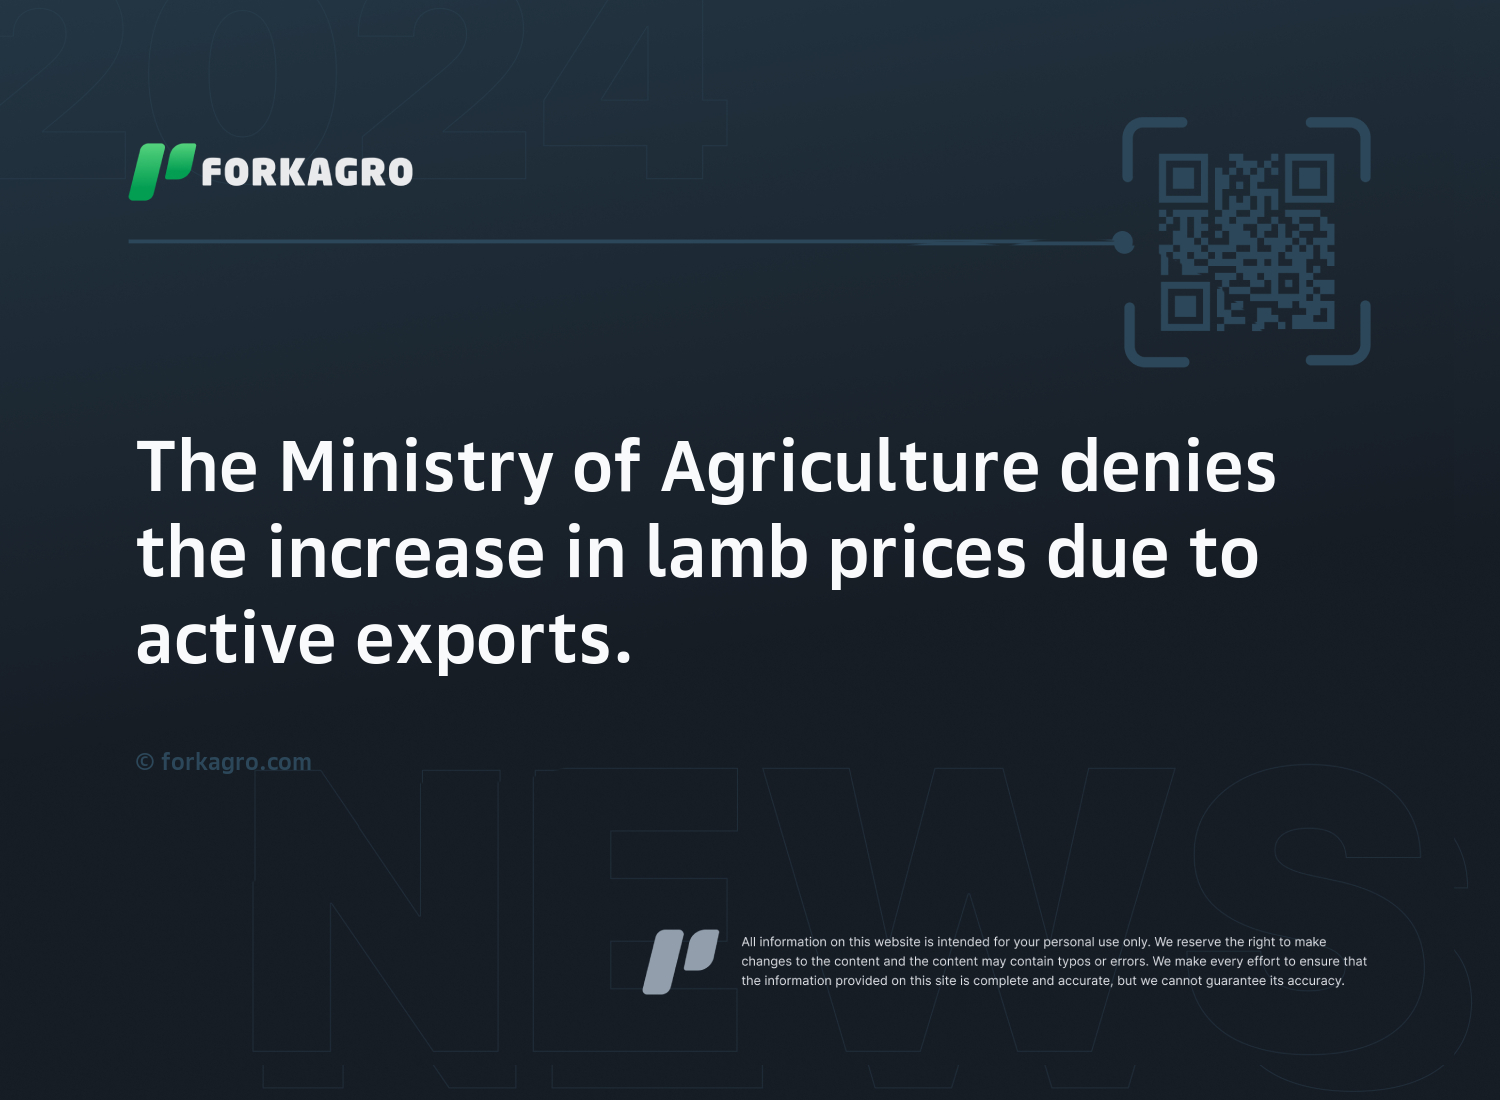 The Ministry of Agriculture denies the increase in lamb prices due to active exports.